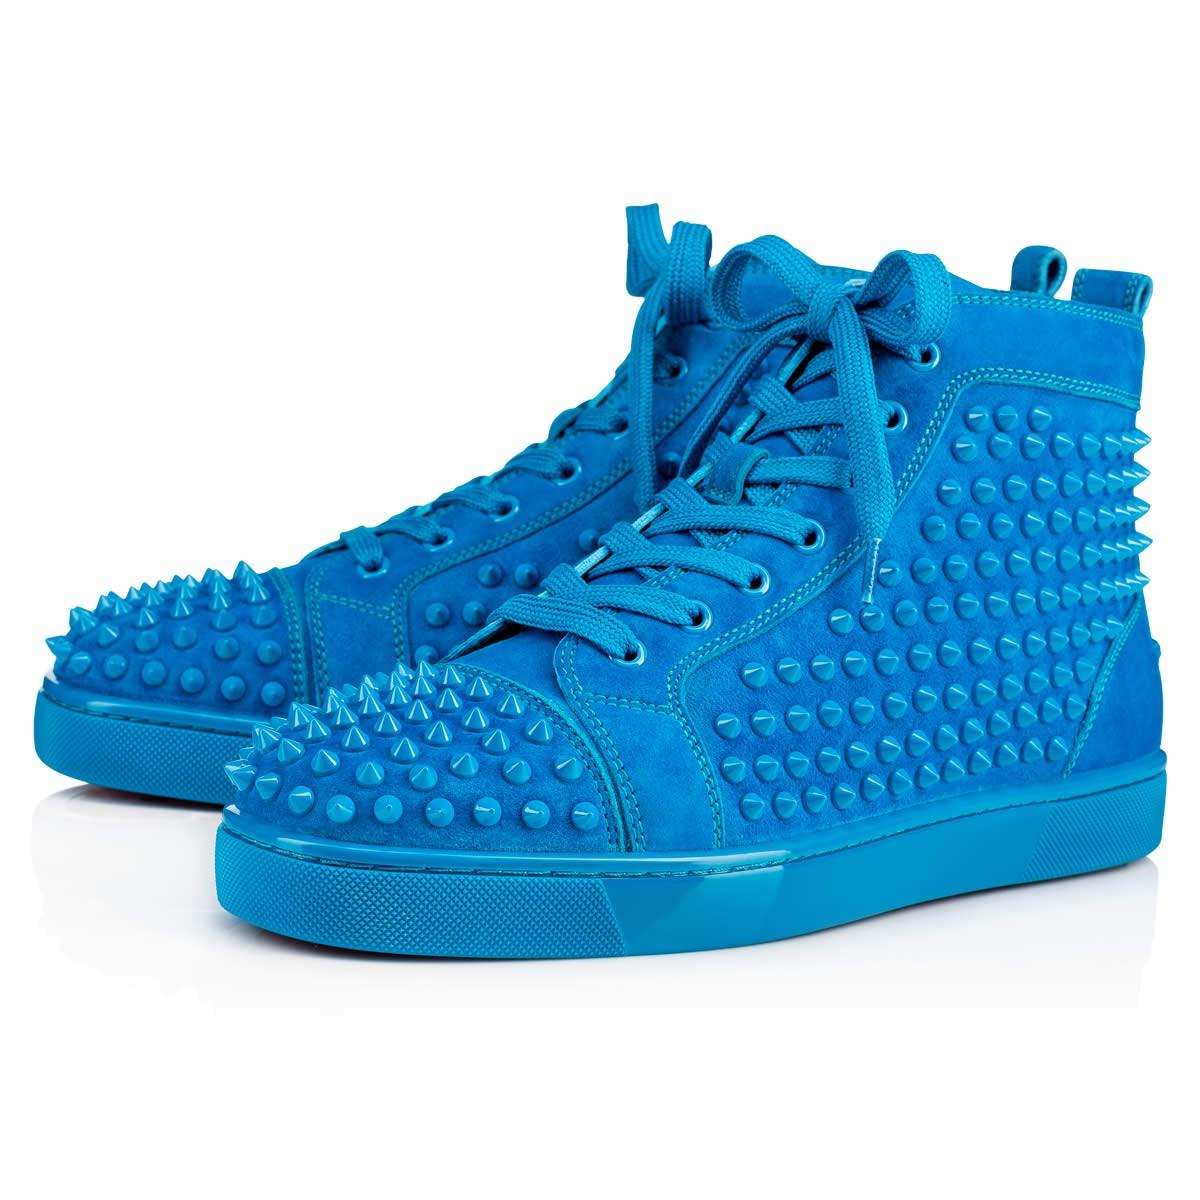 blue suede louboutin